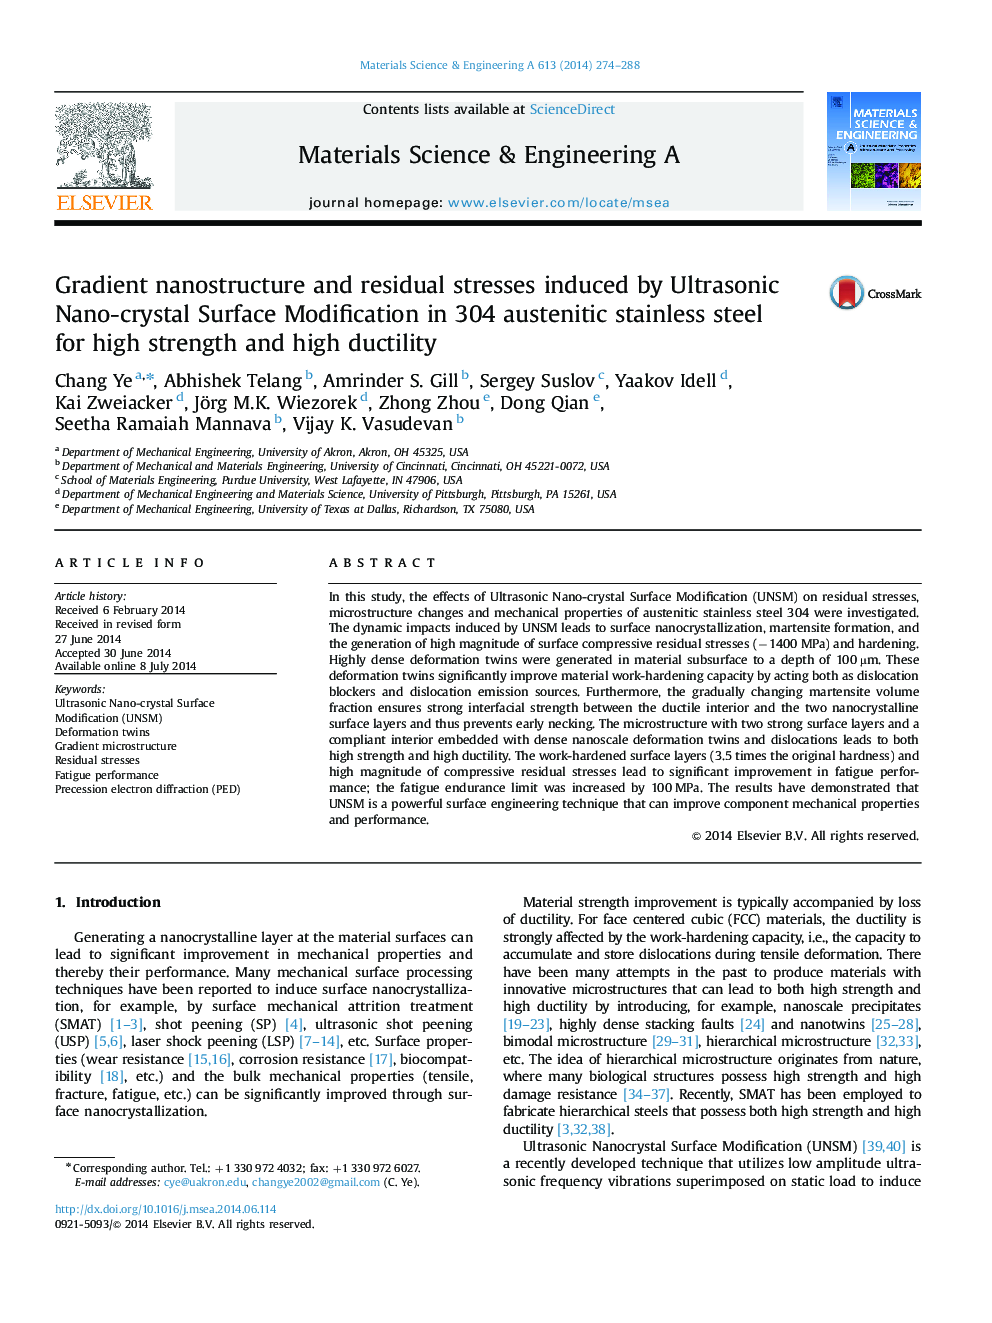 Gradient nanostructure and residual stresses induced by Ultrasonic Nano-crystal Surface Modification in 304 austenitic stainless steel for high strength and high ductility